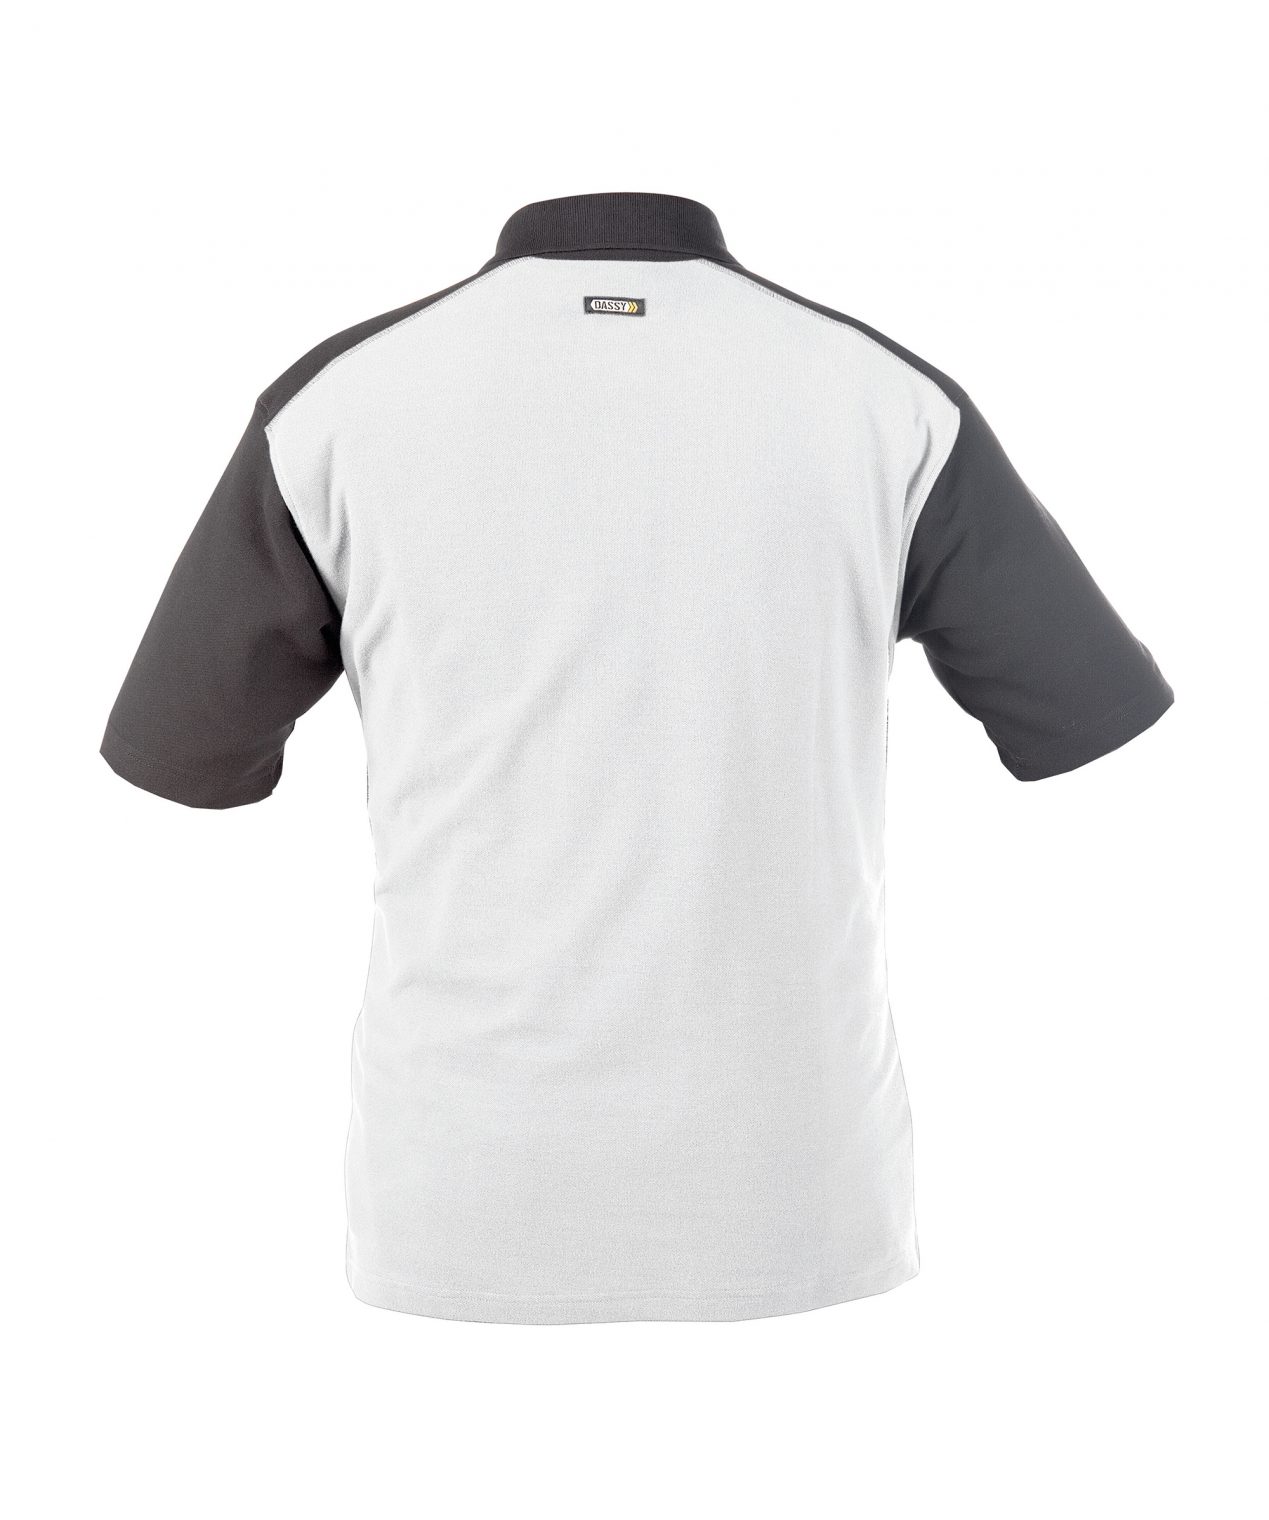 cesar two tone polo shirt white cement grey back